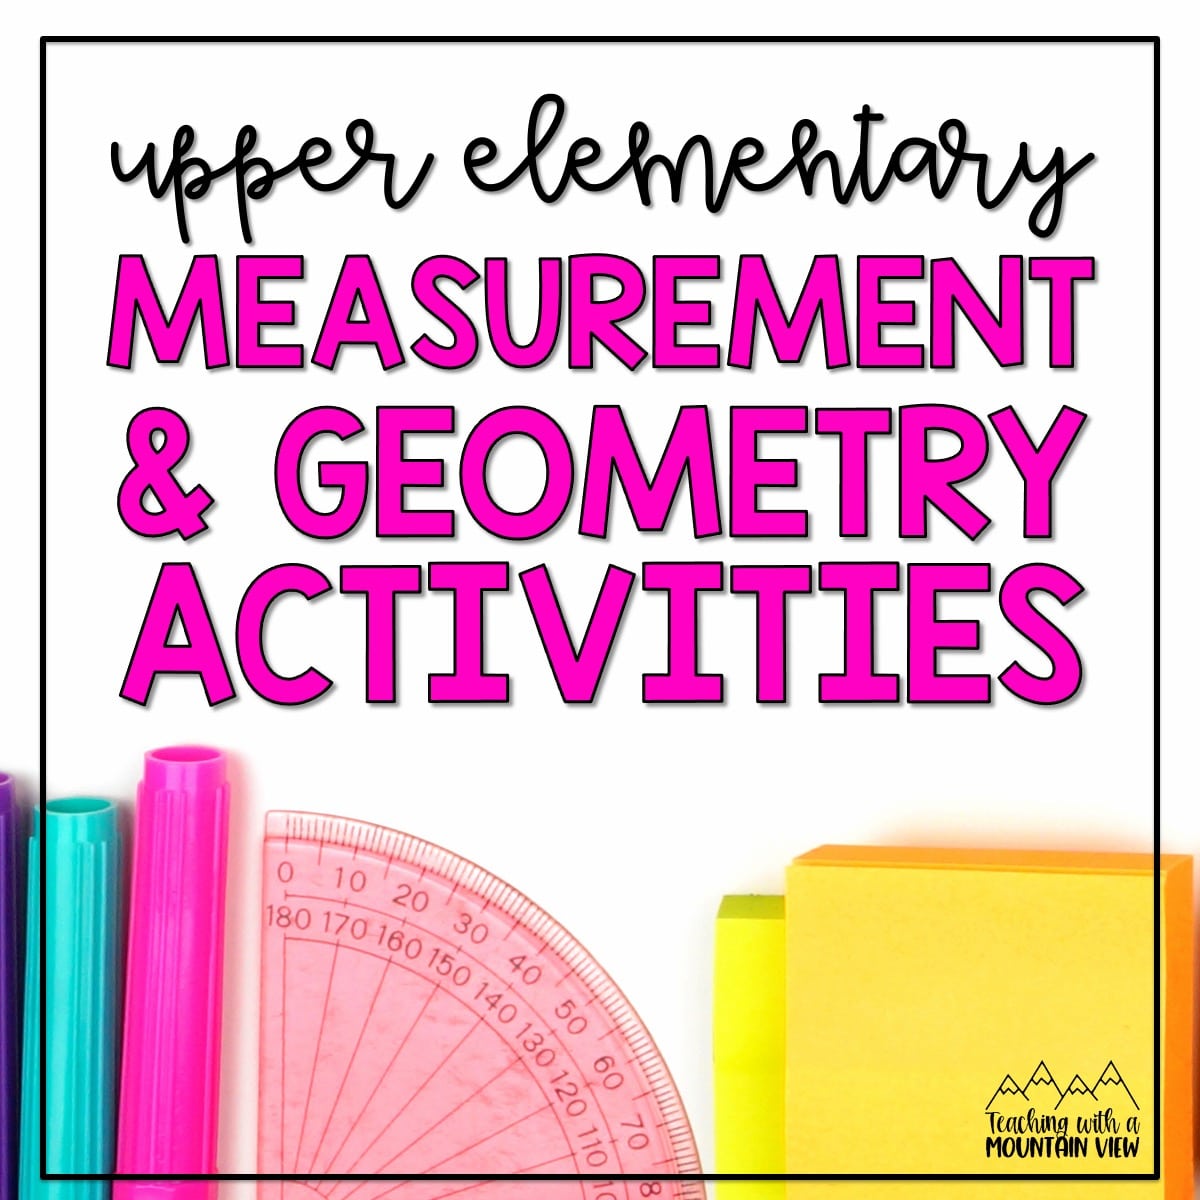 Includes a variety of measurement and geometry activities for upper elementary, plus a fun whole class review game using task cards.